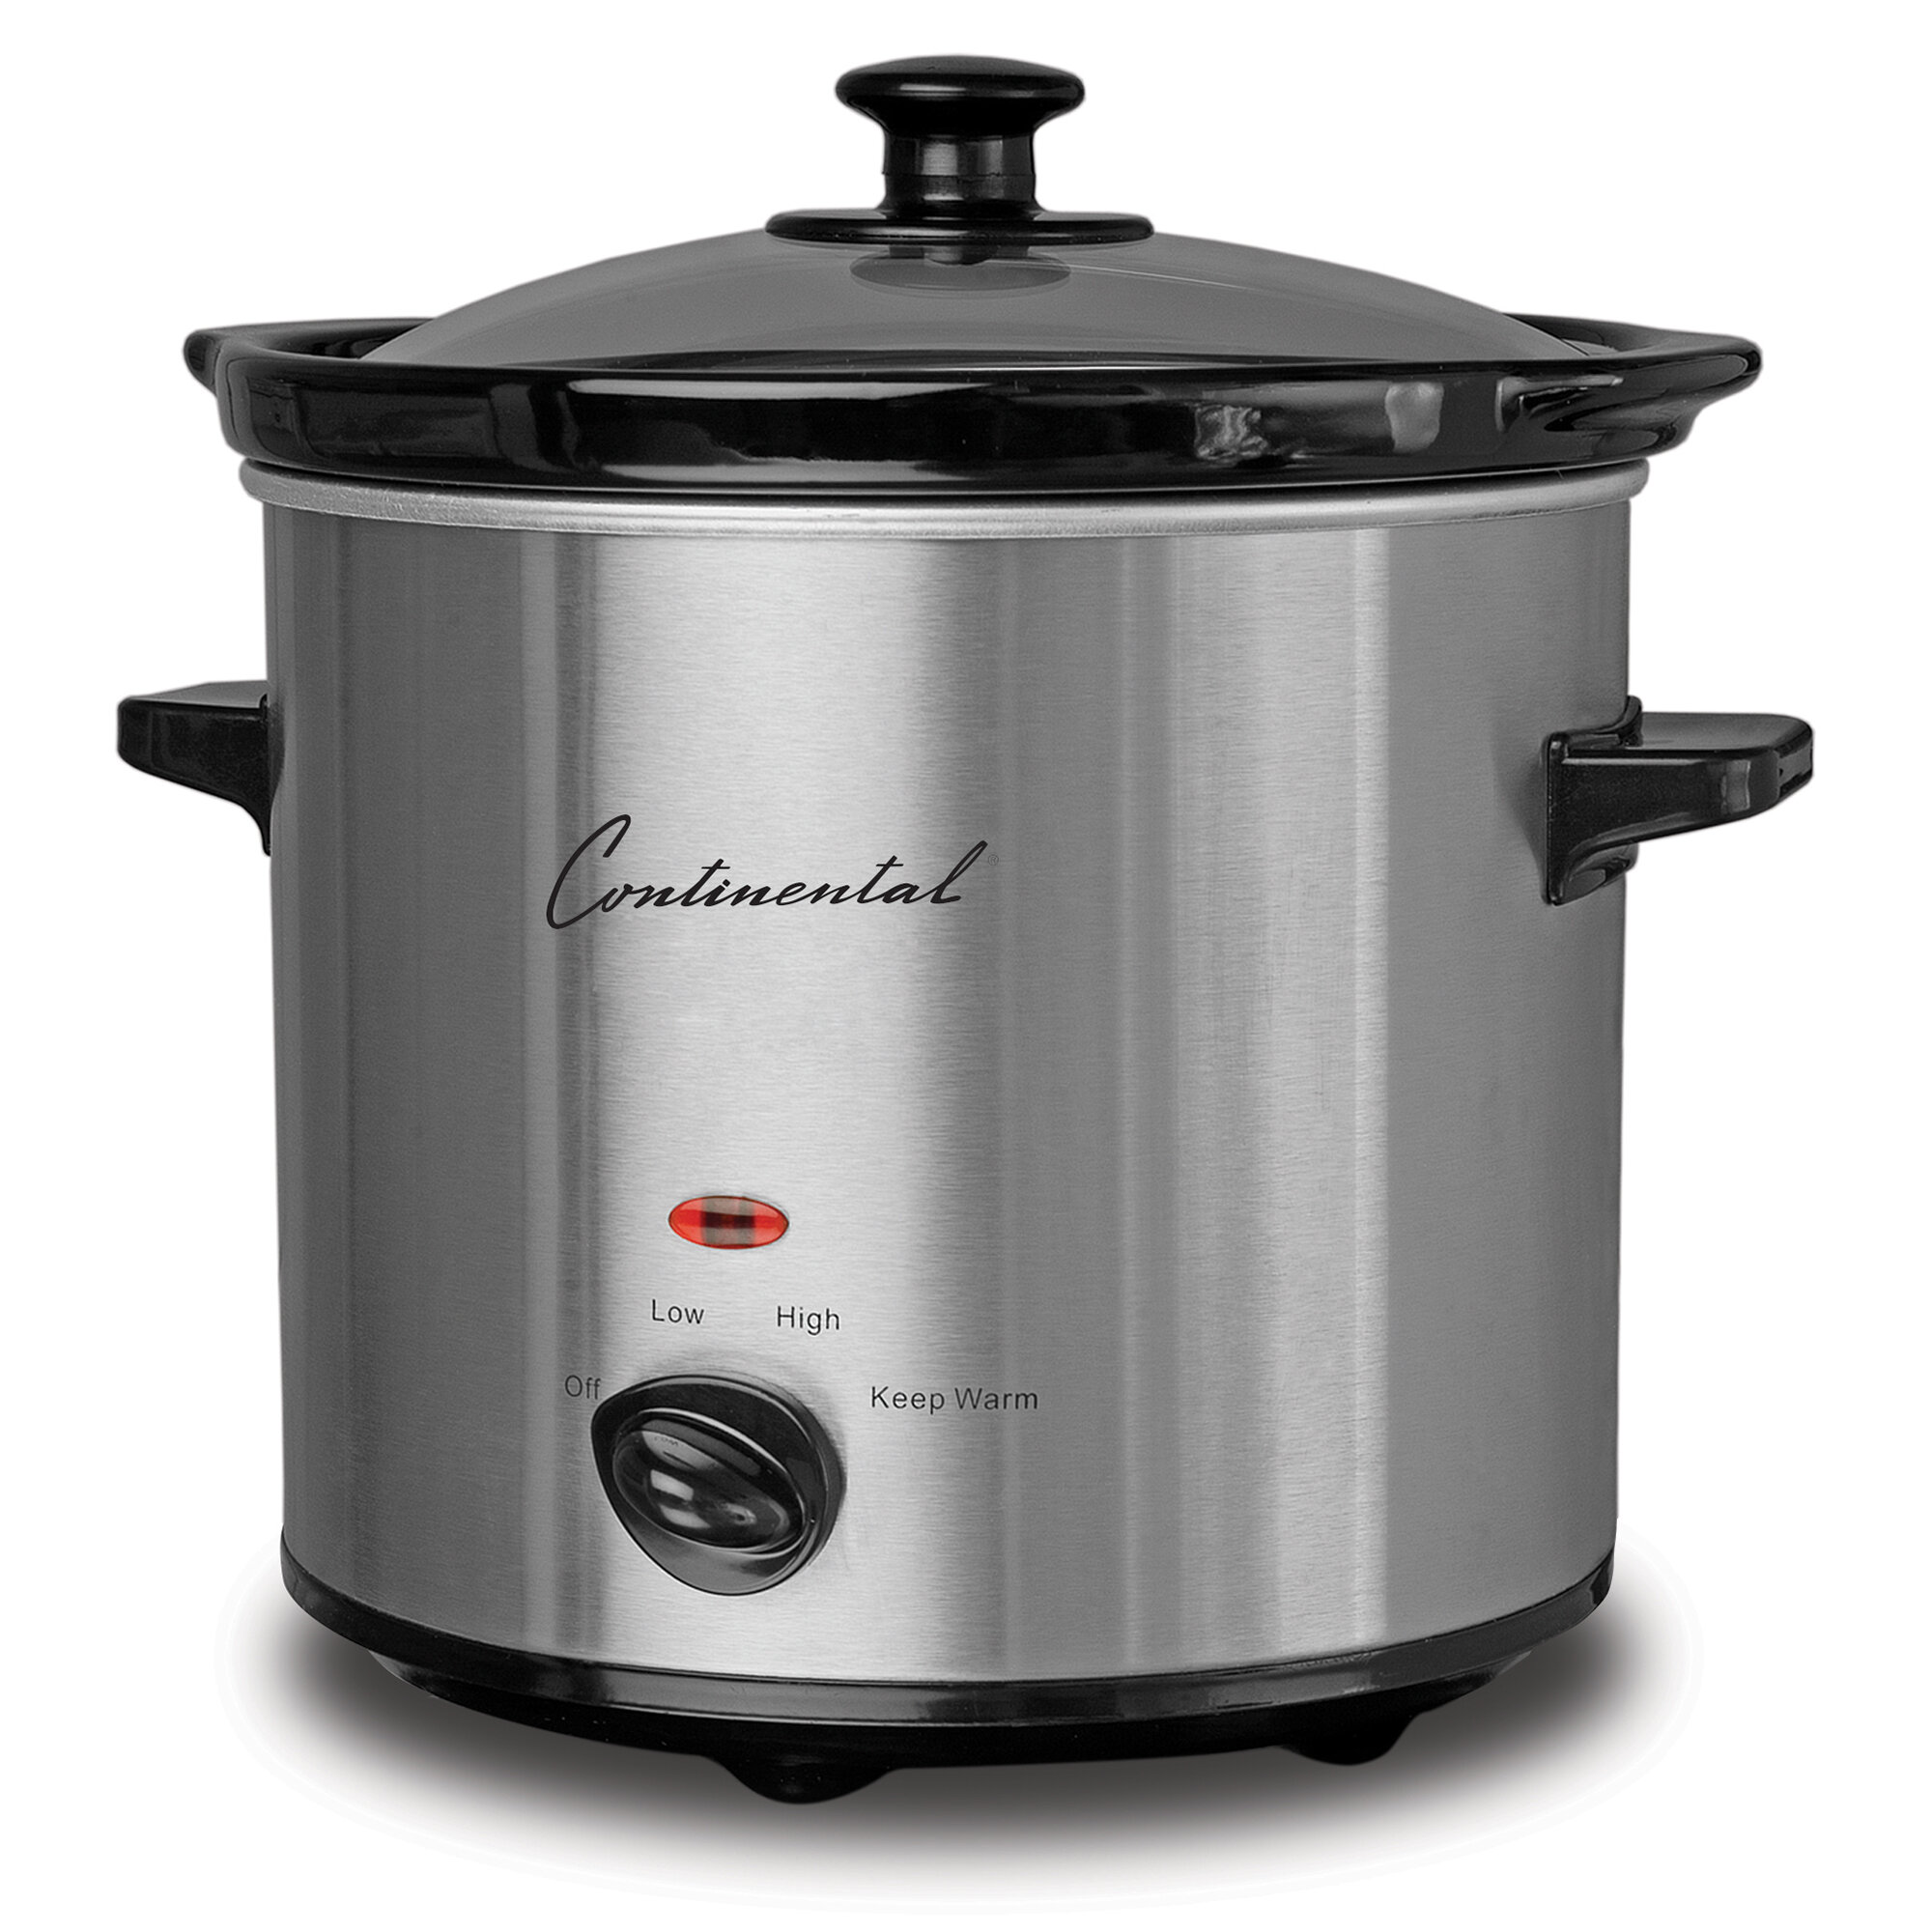 GreenLife Electrics Slow Cooker & Reviews